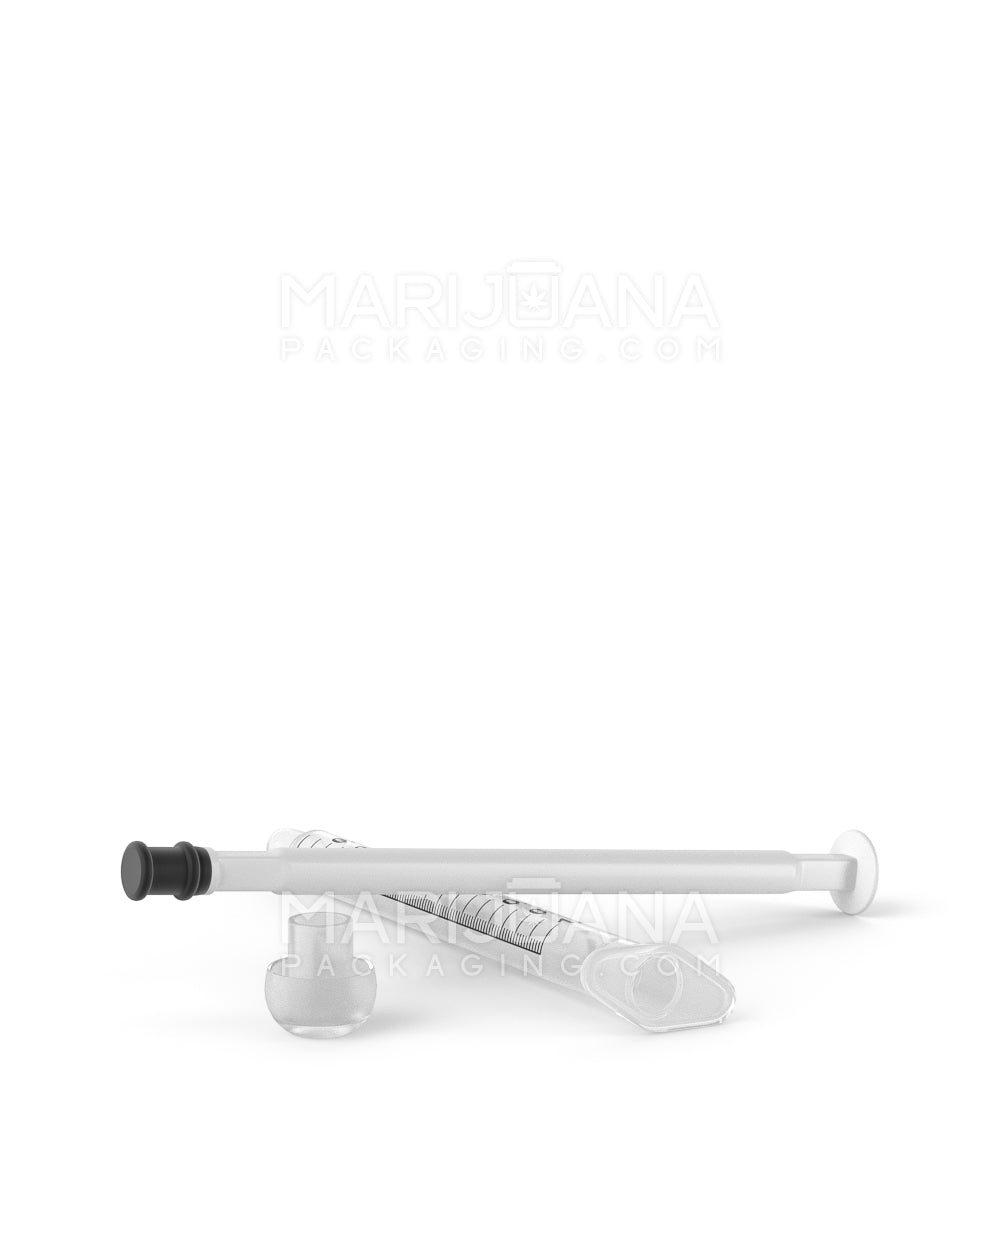 Plastic Oral Concentrate Syringes | 1mL - 0.1mL Increments - 100 Count - 5